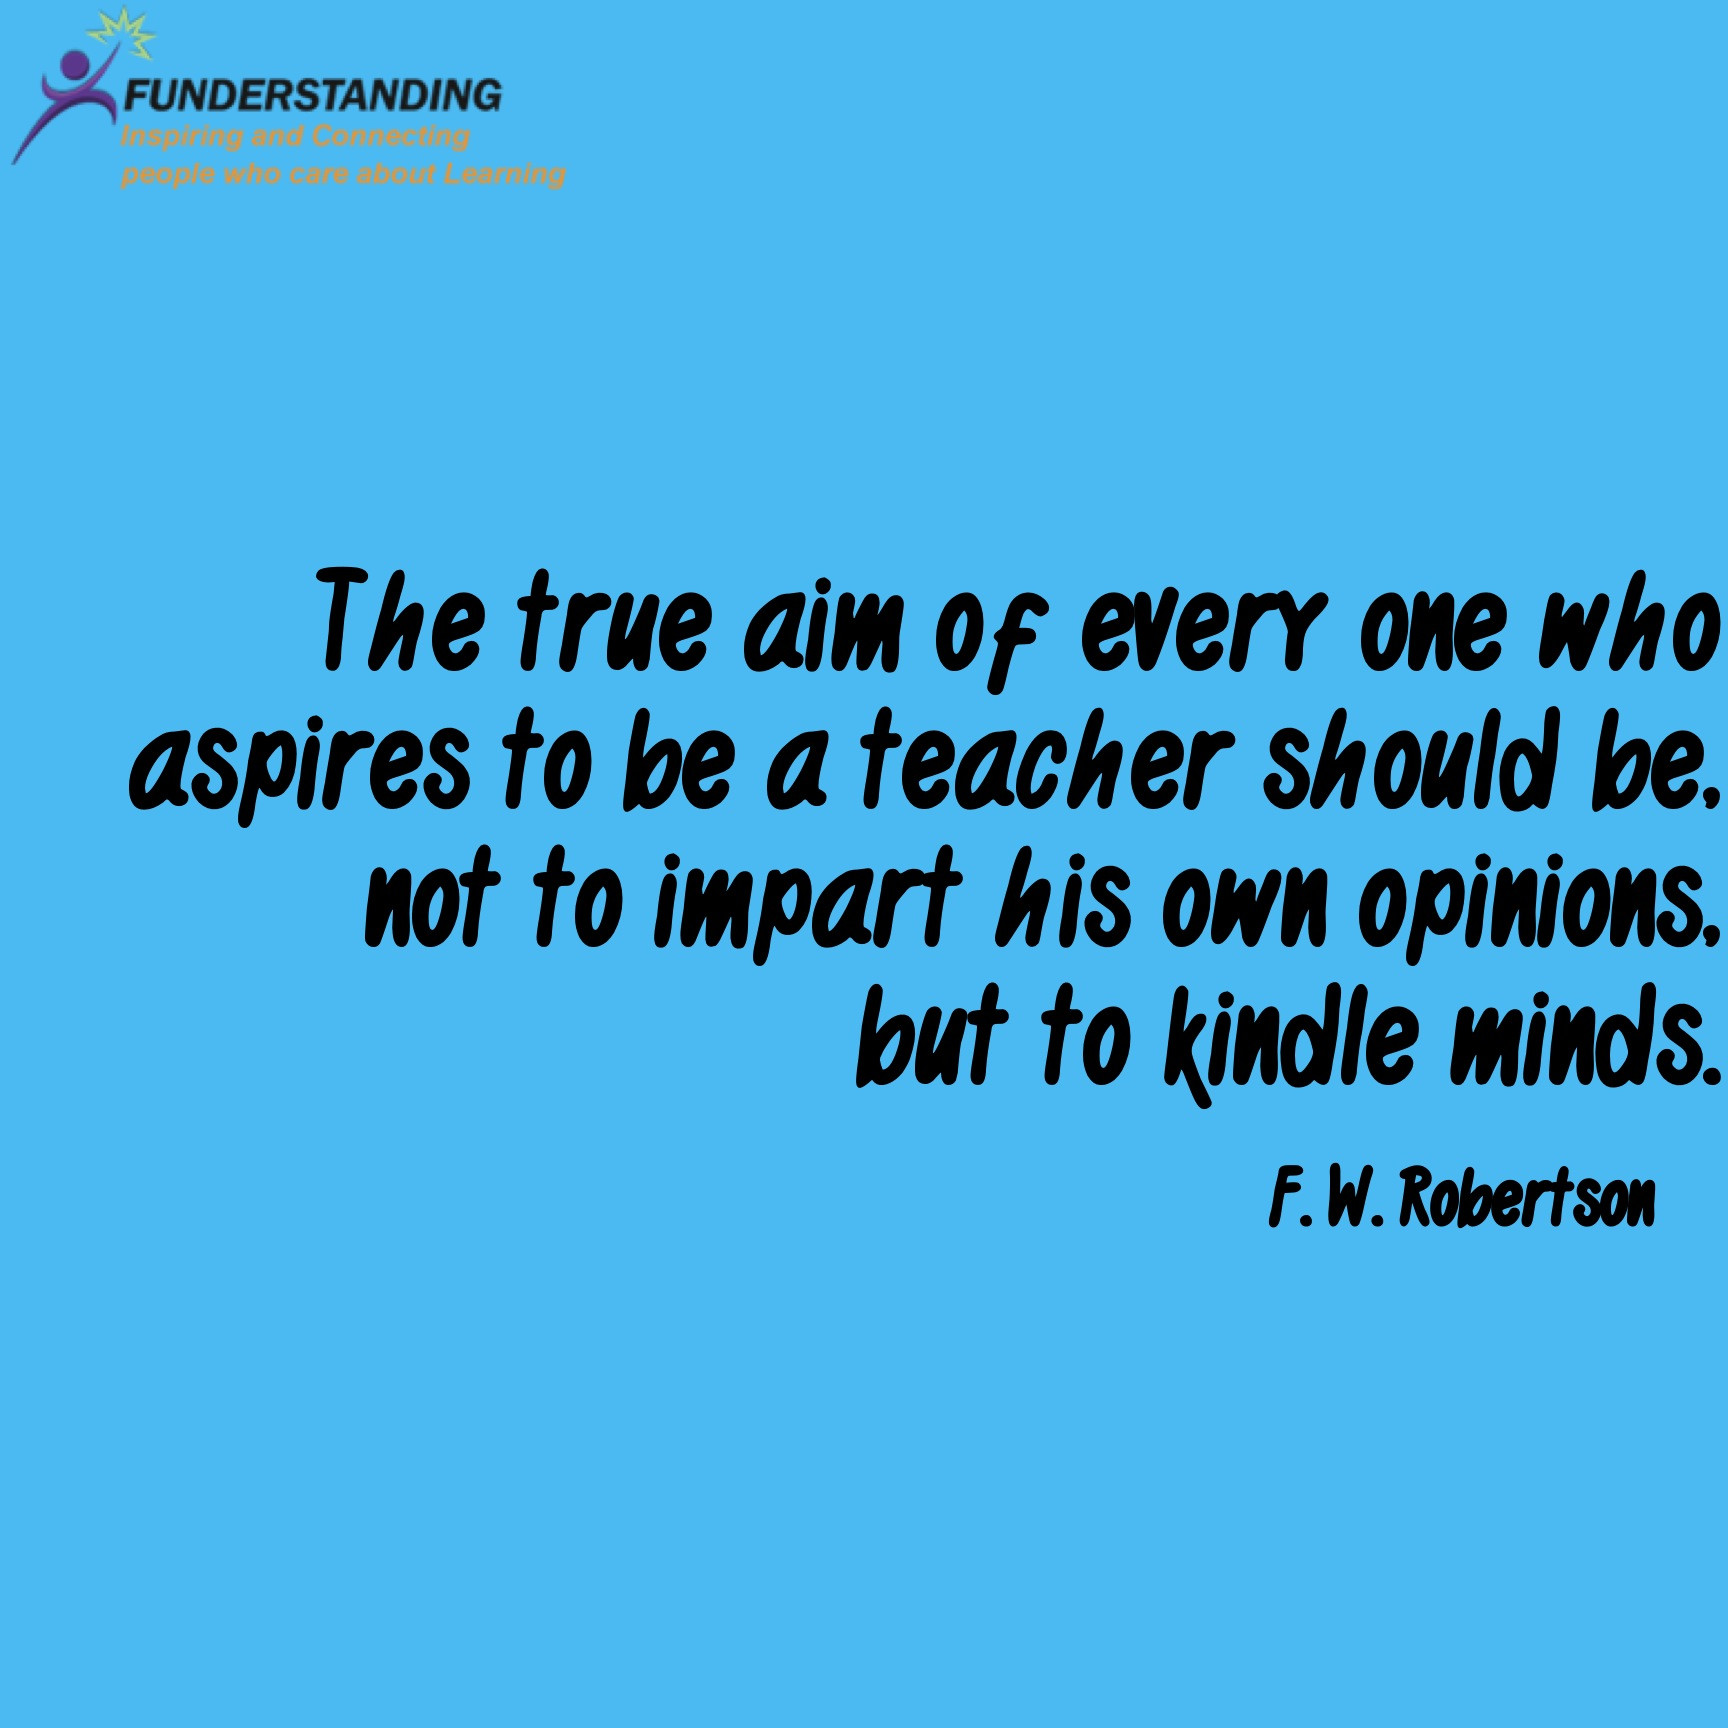 Quote About Special Education
 Quotes Related To Special Education QuotesGram